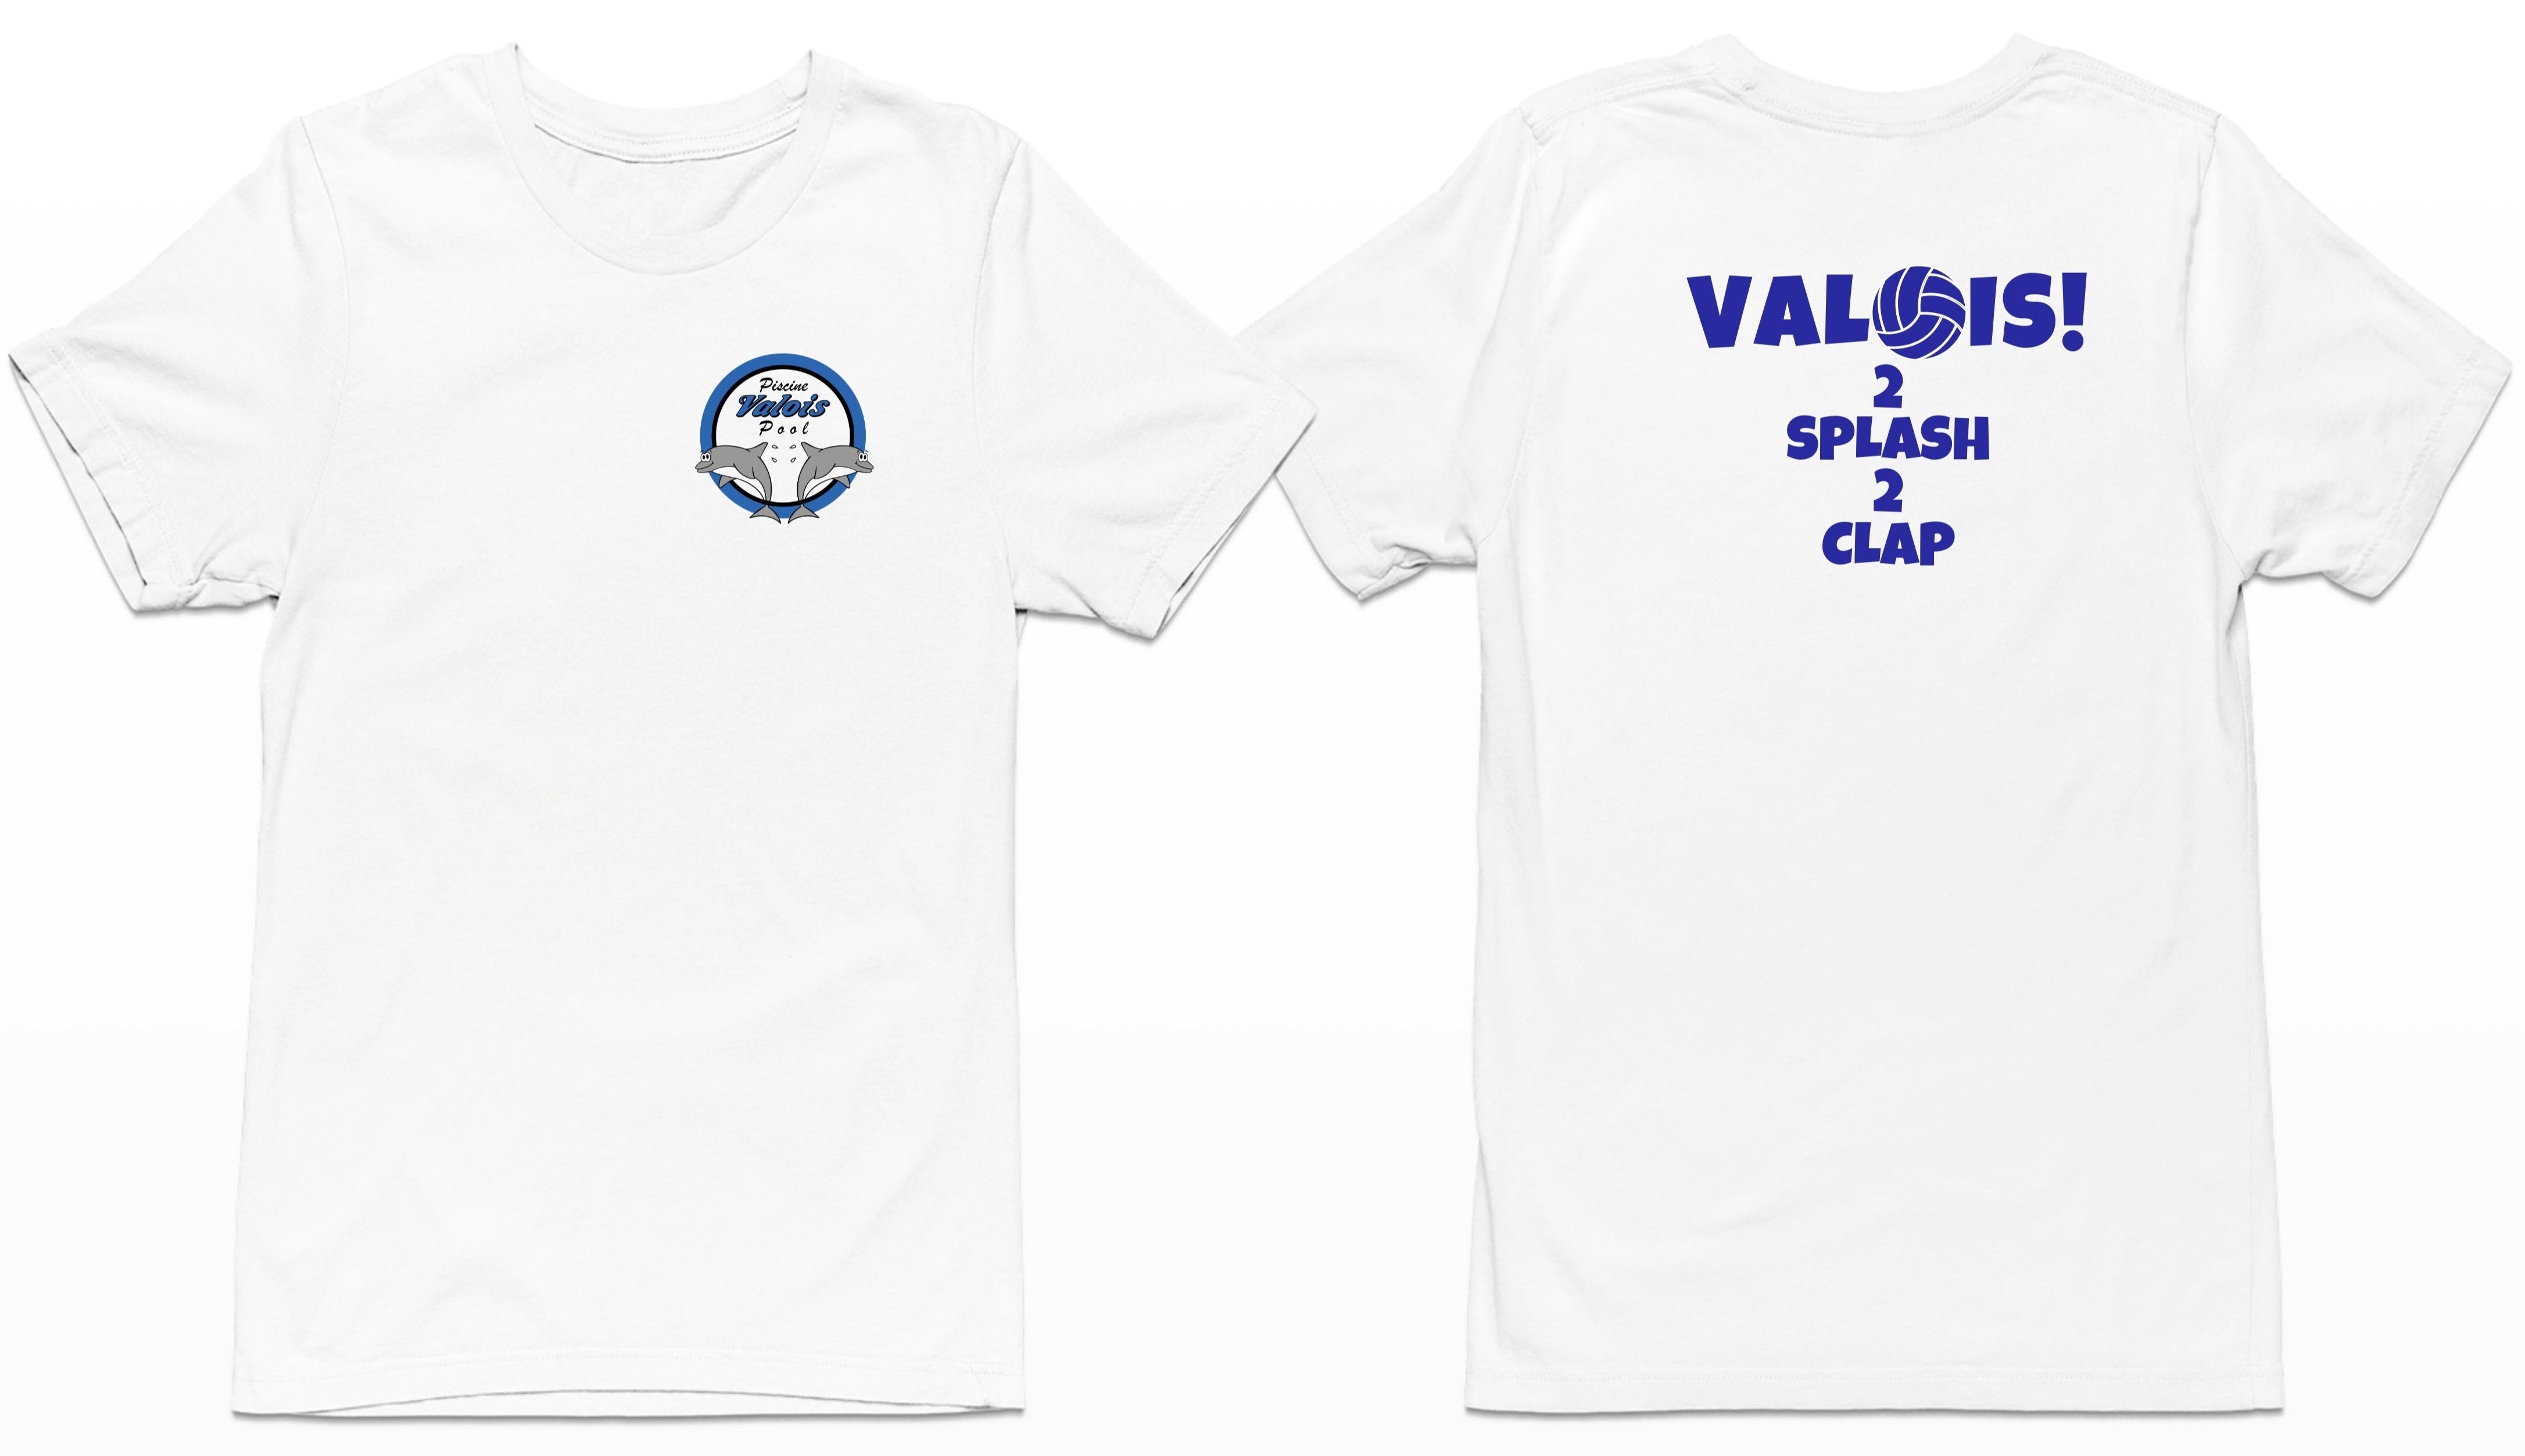 Valois Water Polo T-Shirts